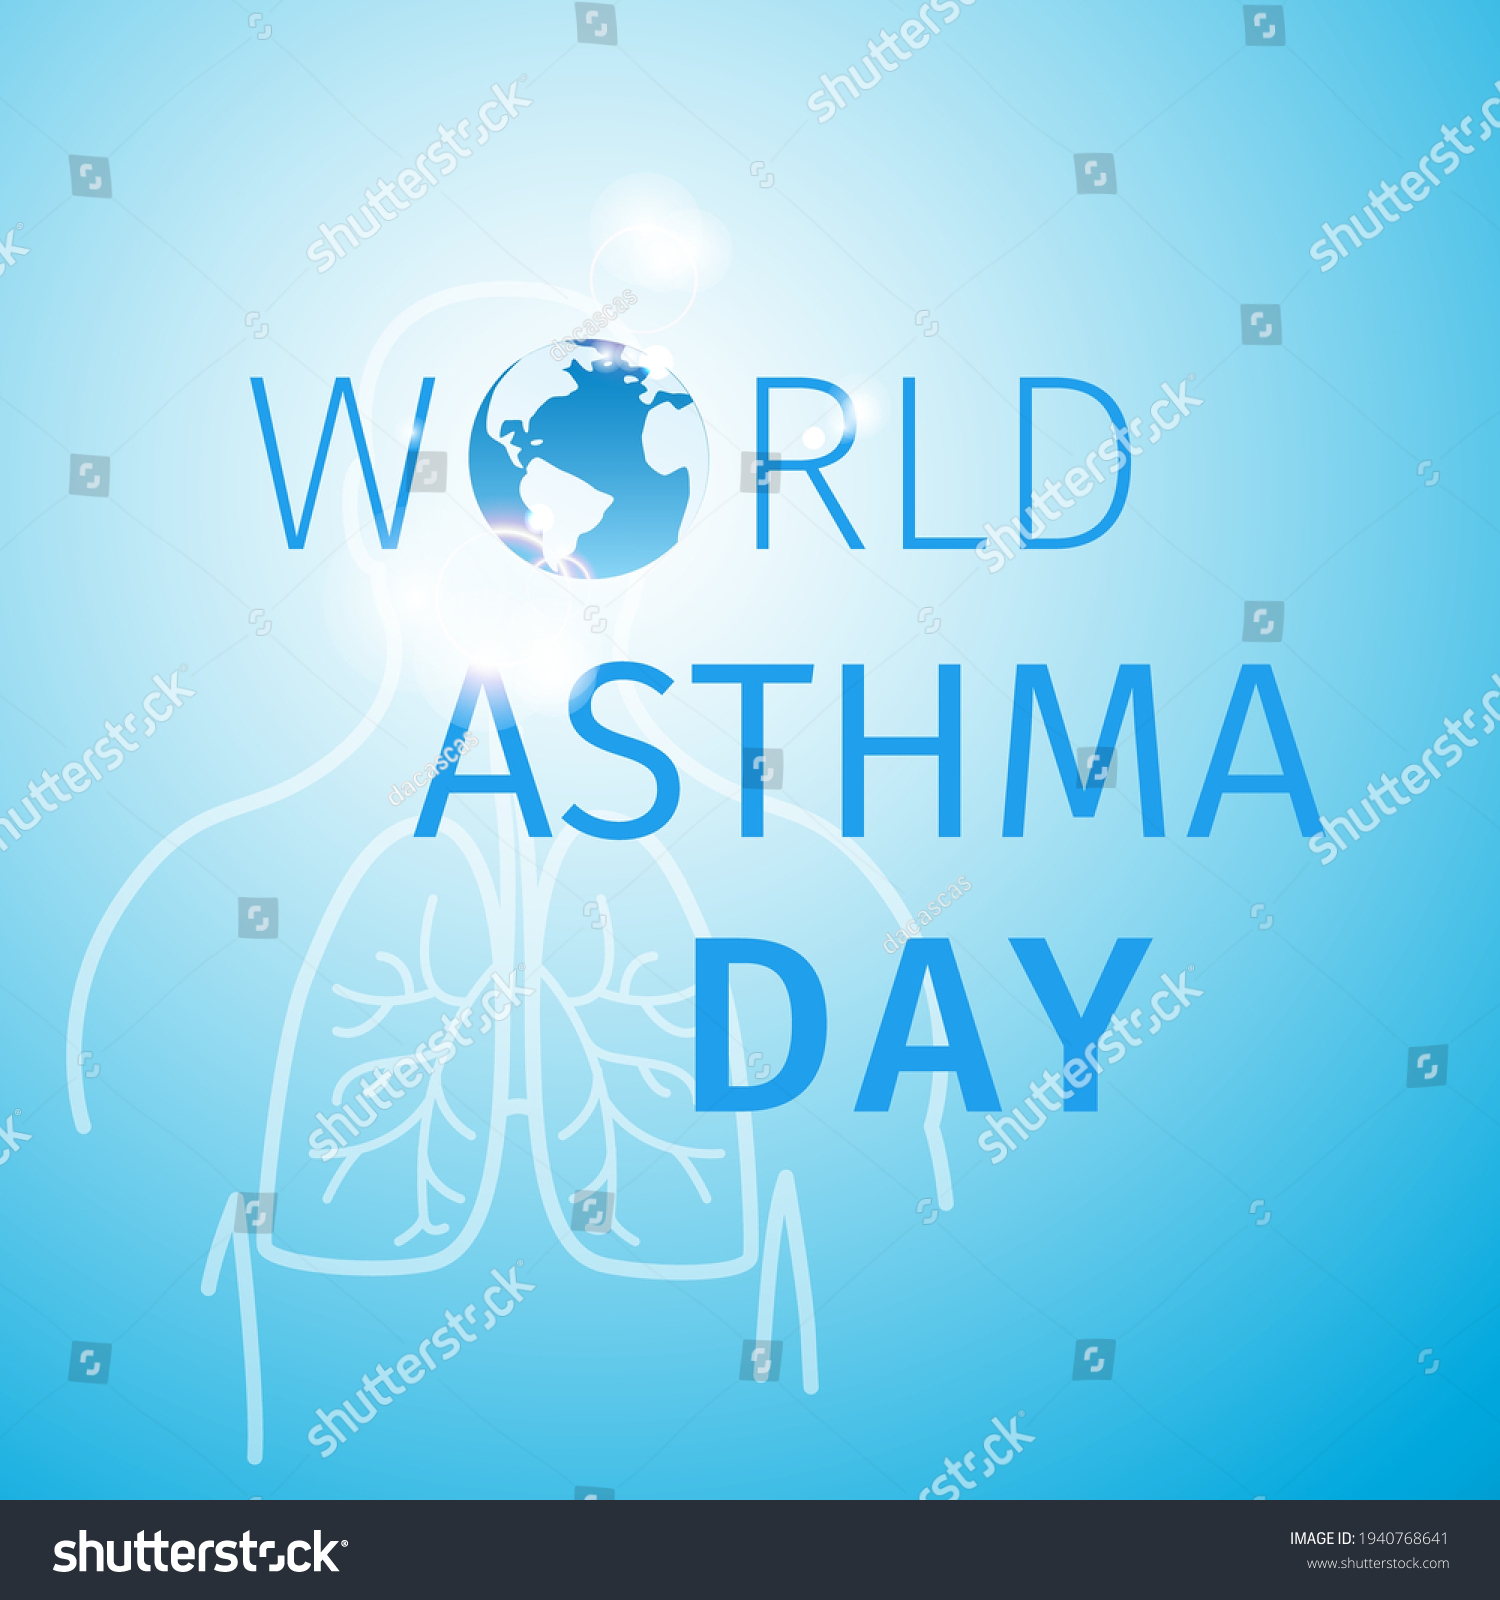 World Asthma Day Poster Abstract Blue Stock Vector (Royalty Free